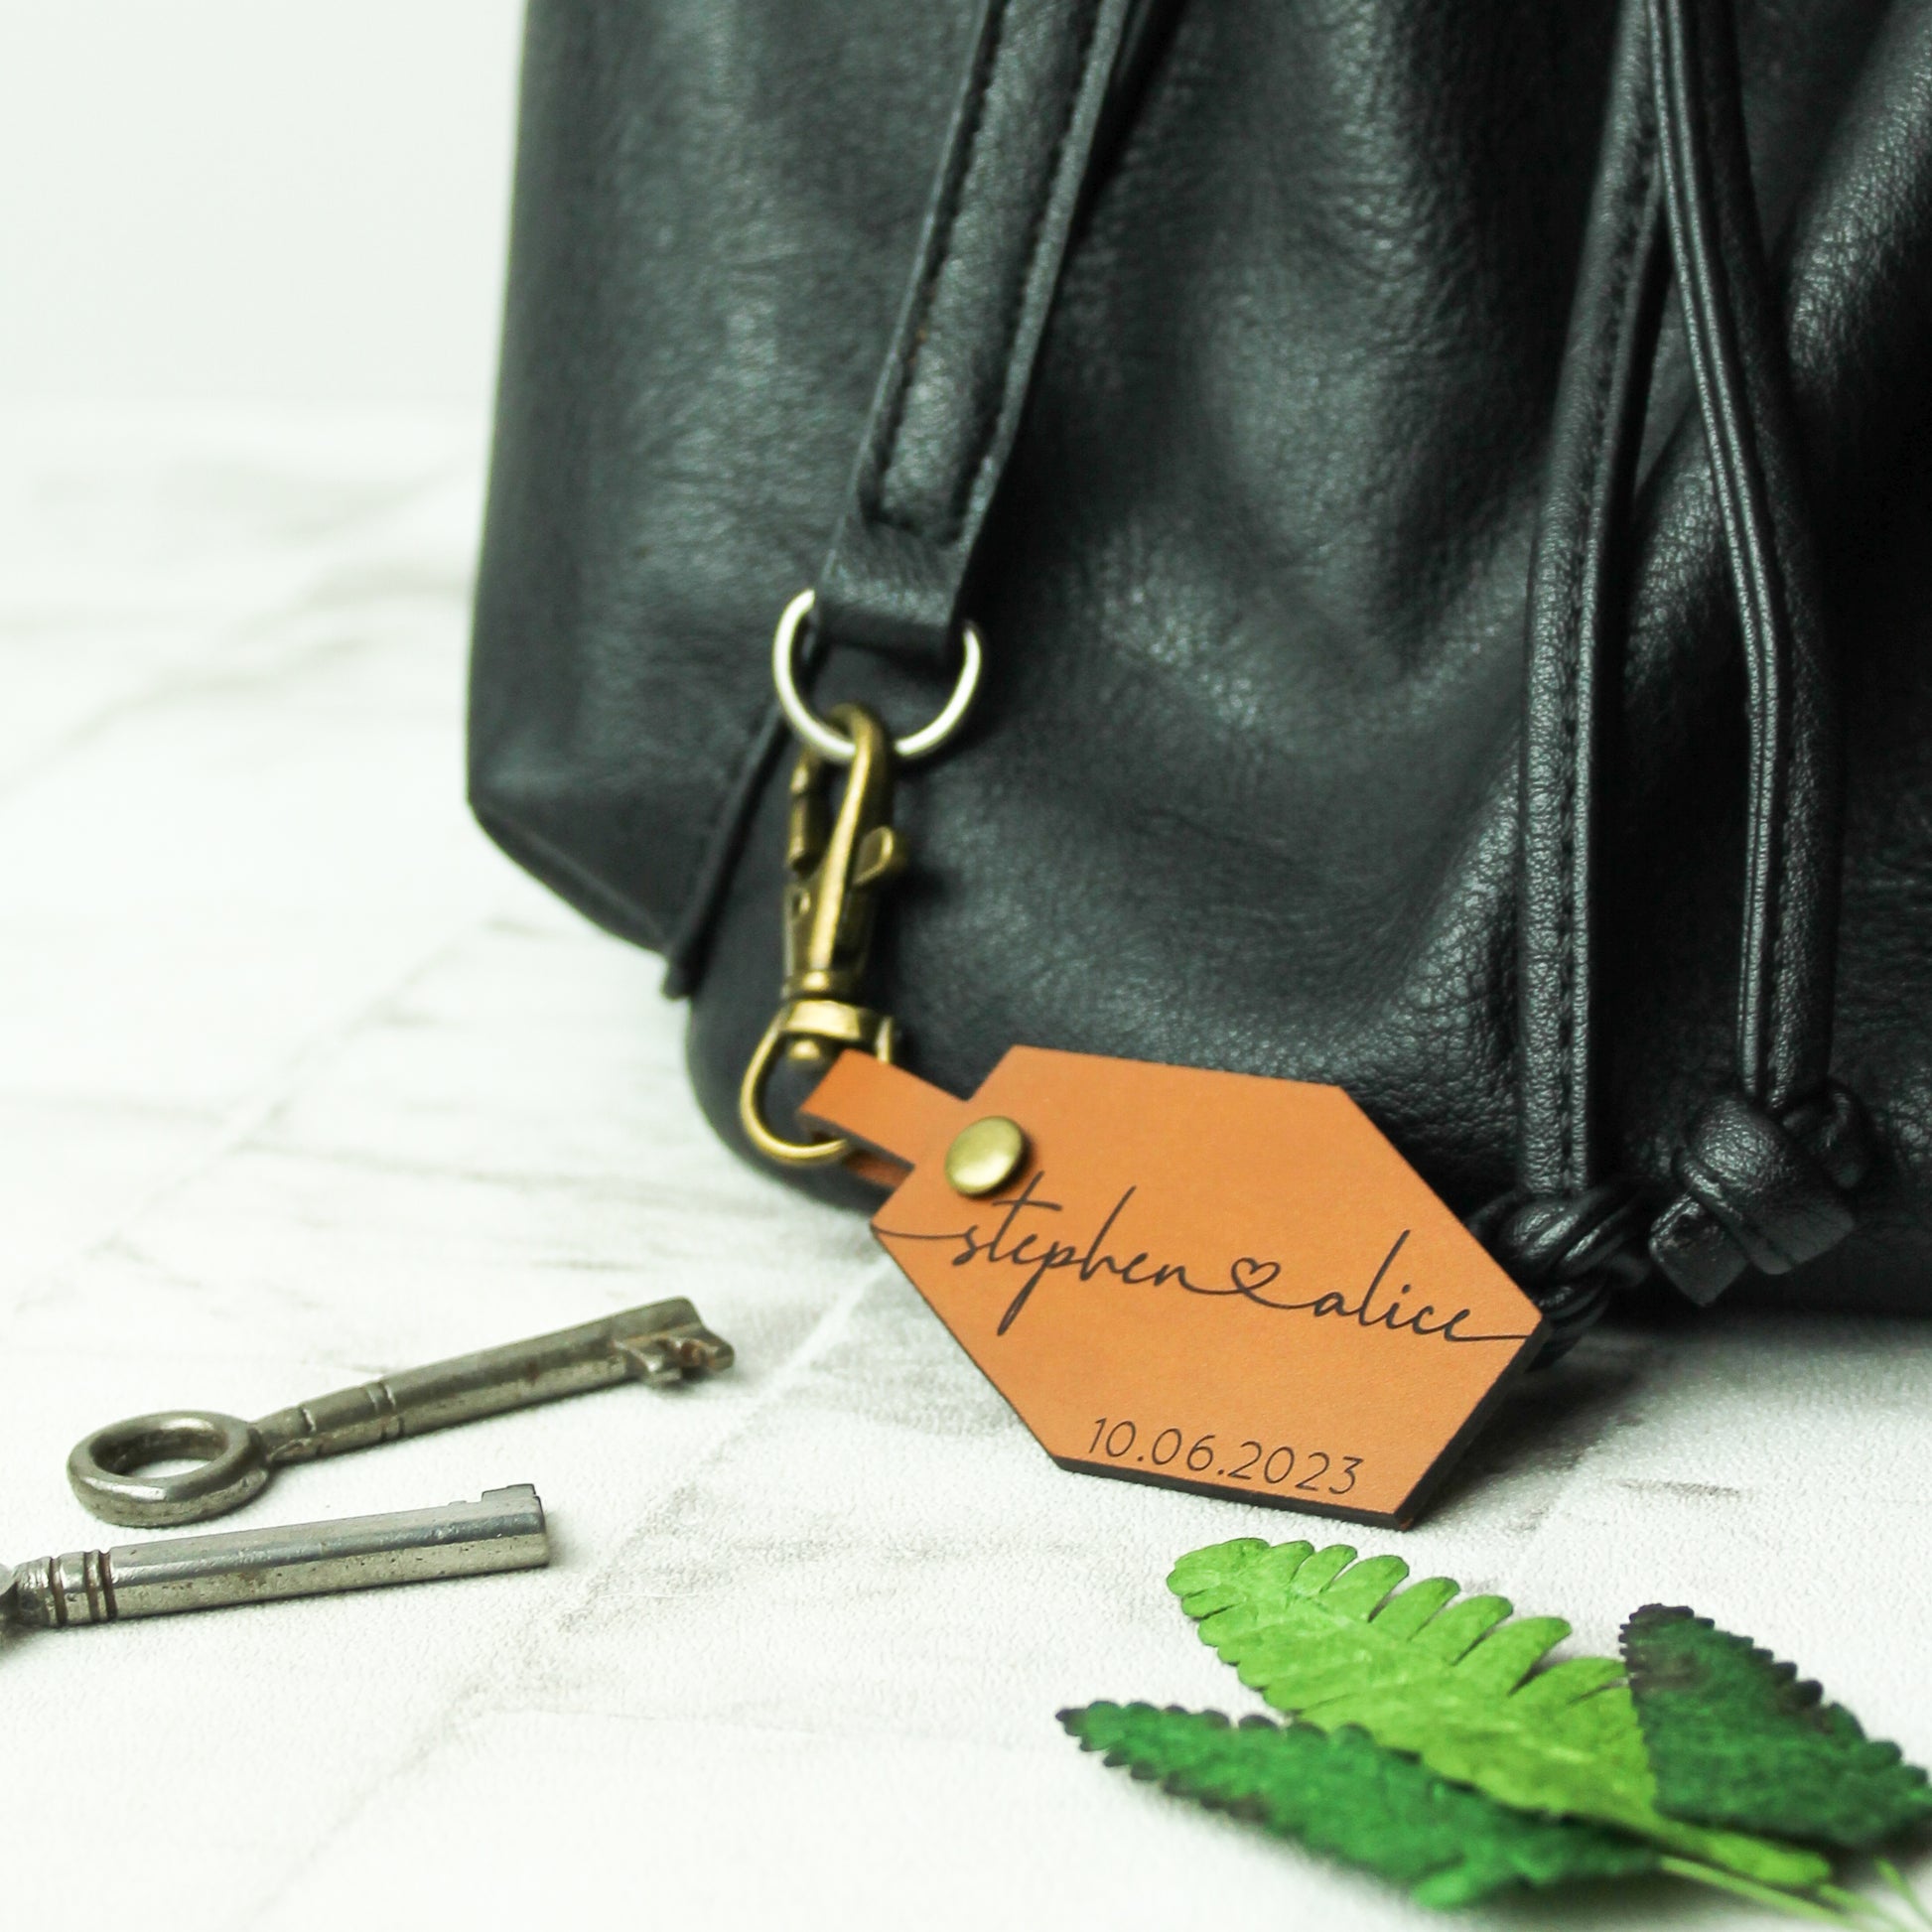 couple names and date engraved on a brown leather bag tag perfect for anniversary